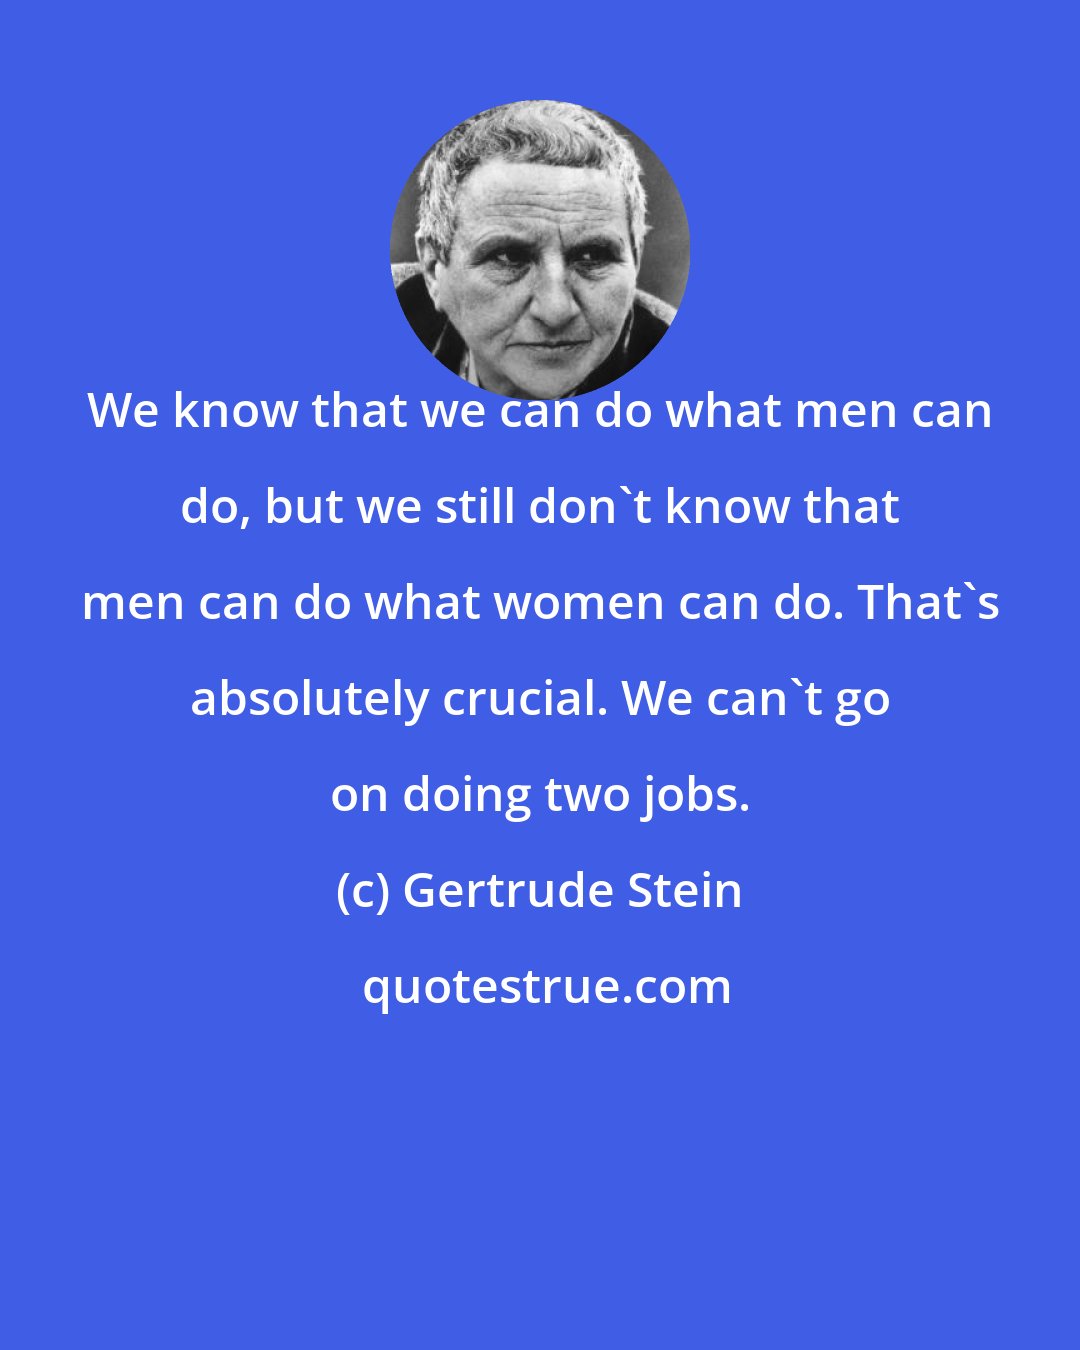 Gertrude Stein: We know that we can do what men can do, but we still don't know that men can do what women can do. That's absolutely crucial. We can't go on doing two jobs.